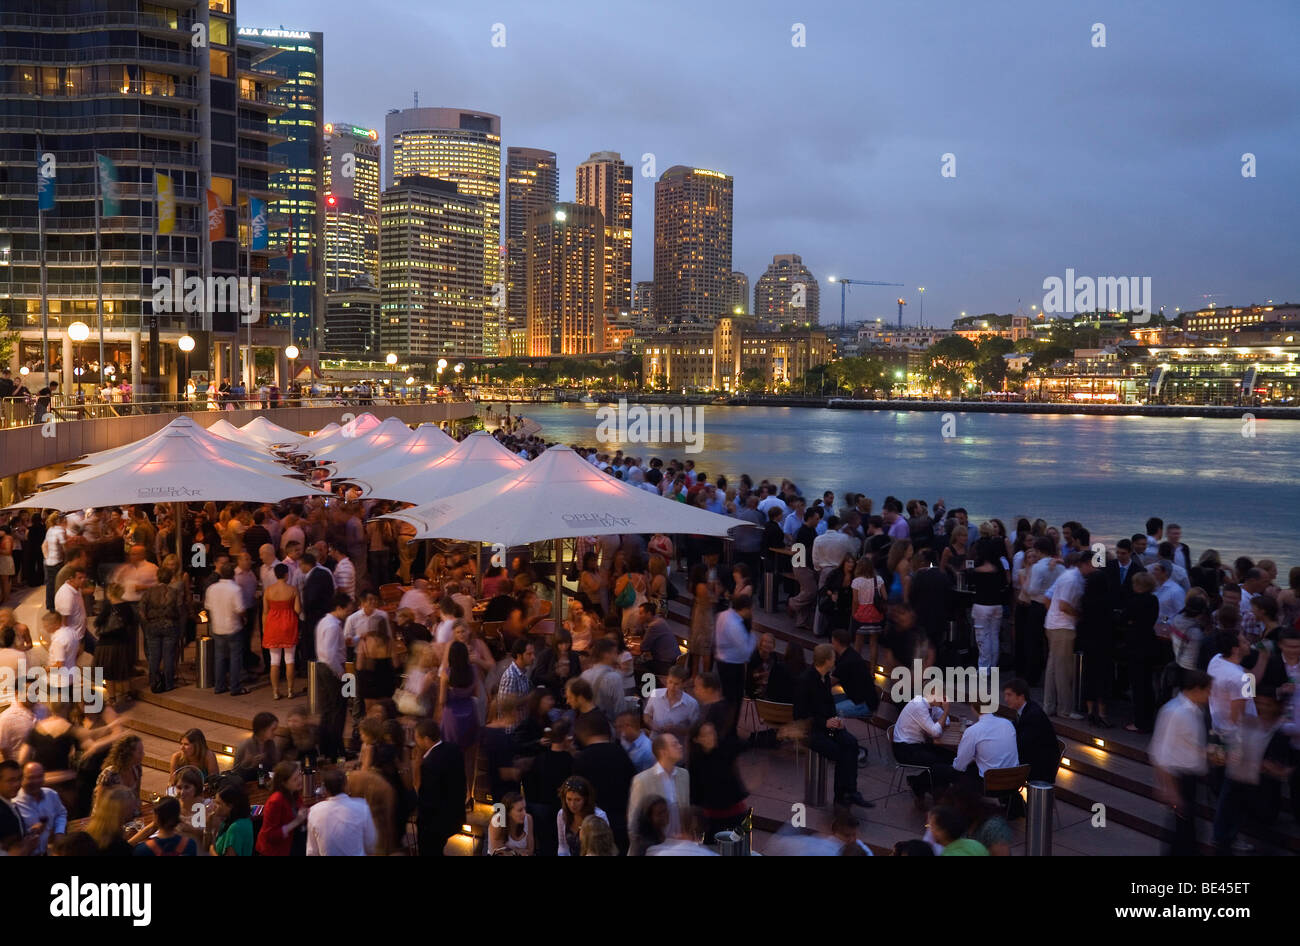 Crowds fill the Opera Bar on the Sydney waterfront with Circular Quay in the background.  Sydney, New South Wales, AUSTRALIA Stock Photo